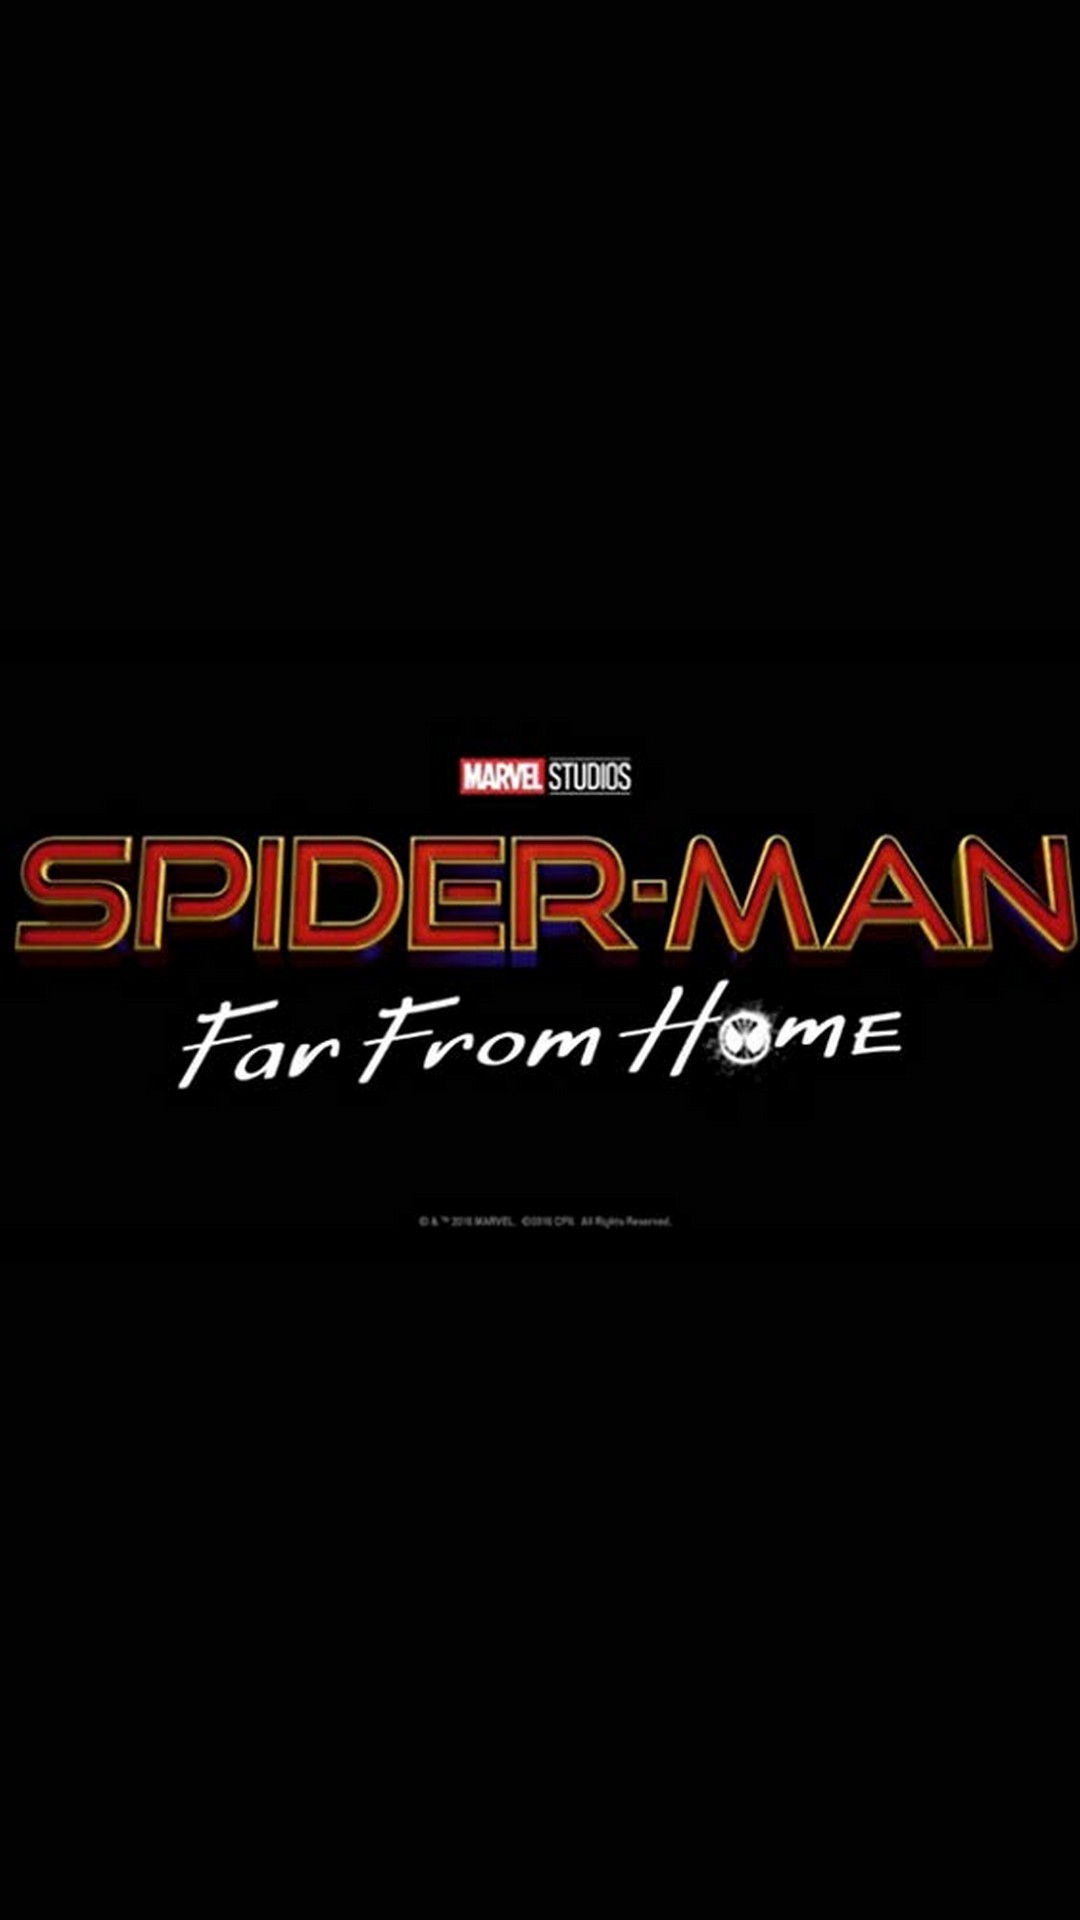 Spider-Man Far From Home Android Wallpaper with high-resolution 1080x1920 pixel. You can use this wallpaper for your Android backgrounds, Tablet, Samsung Screensavers, Mobile Phone Lock Screen and another Smartphones device